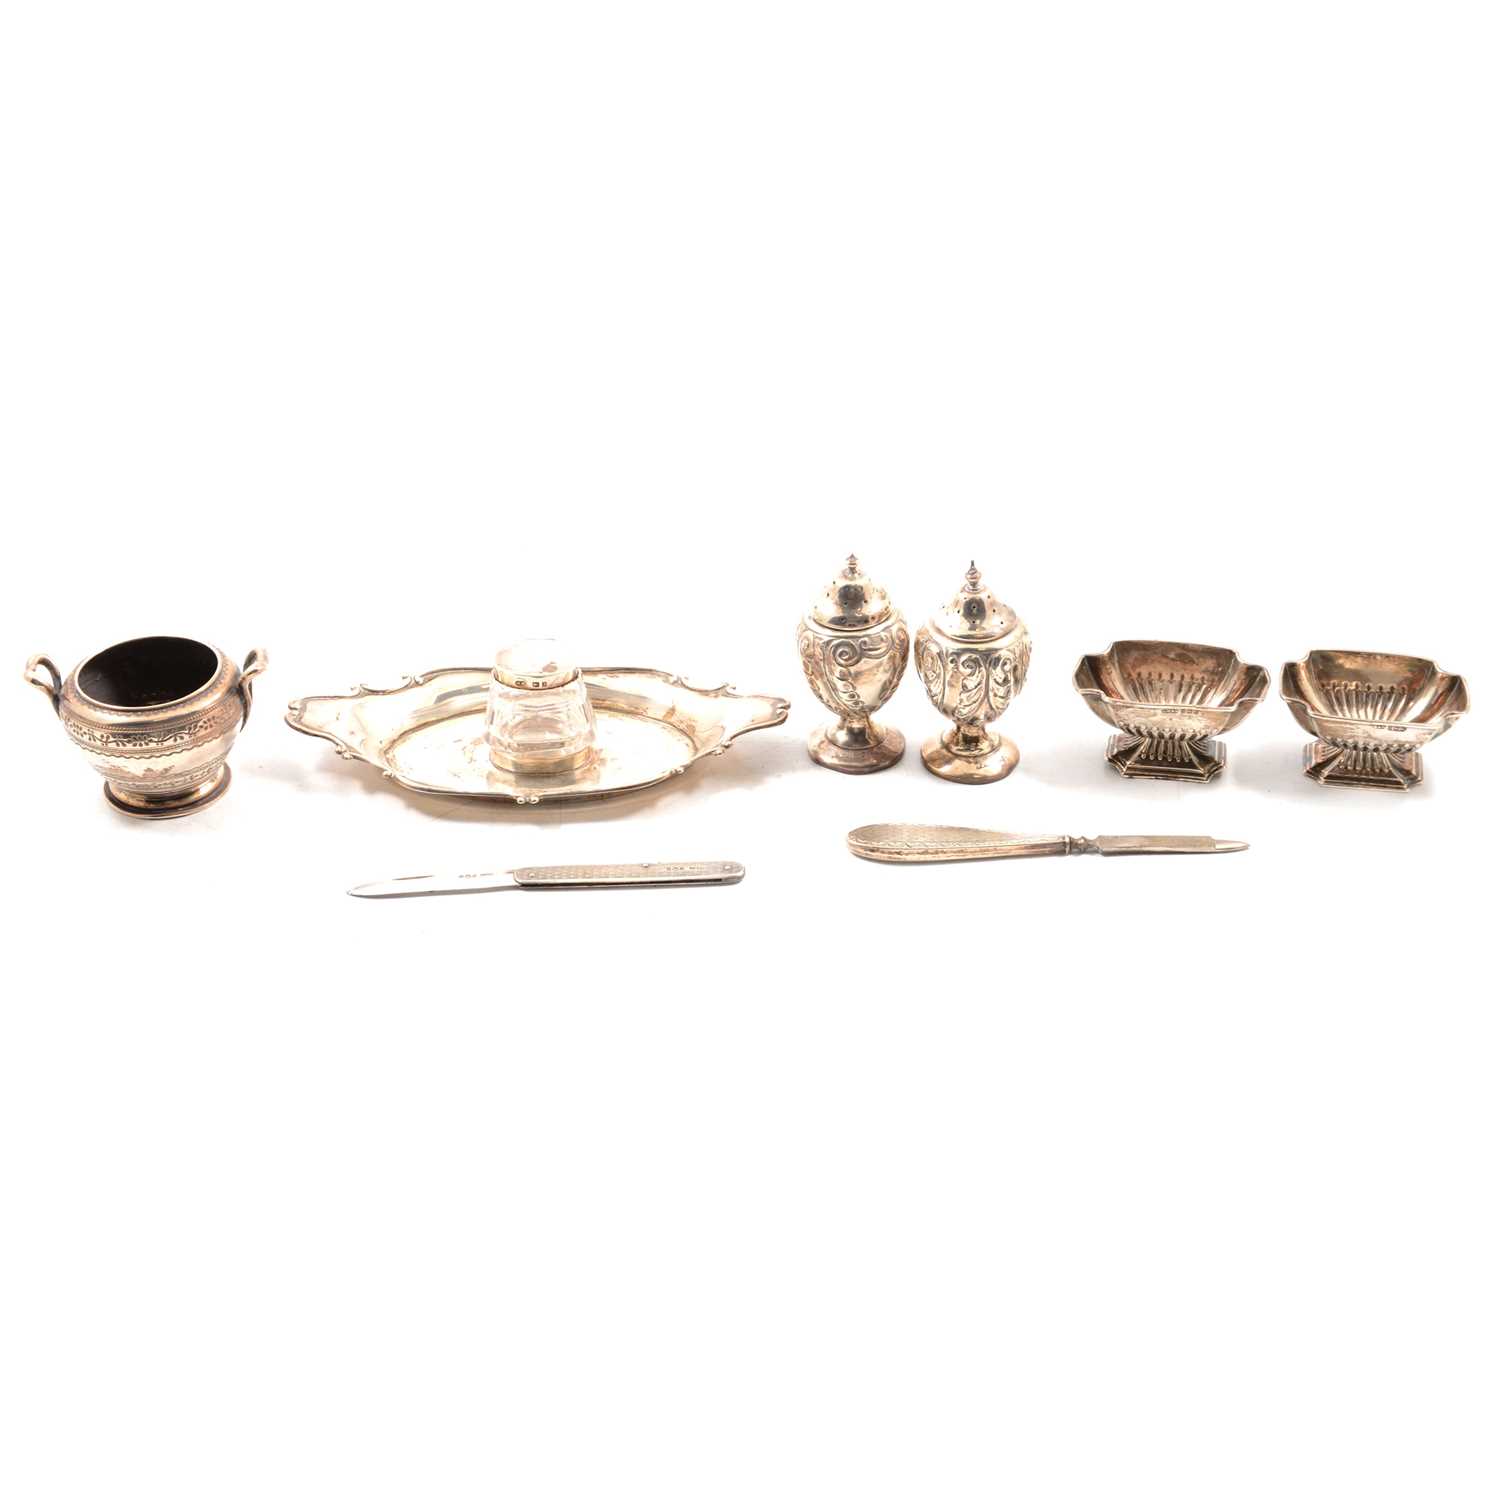 Lot 254 - Edwardian silver desk stand, Henry Bourne, Birmingham 1905, and other small silver items.